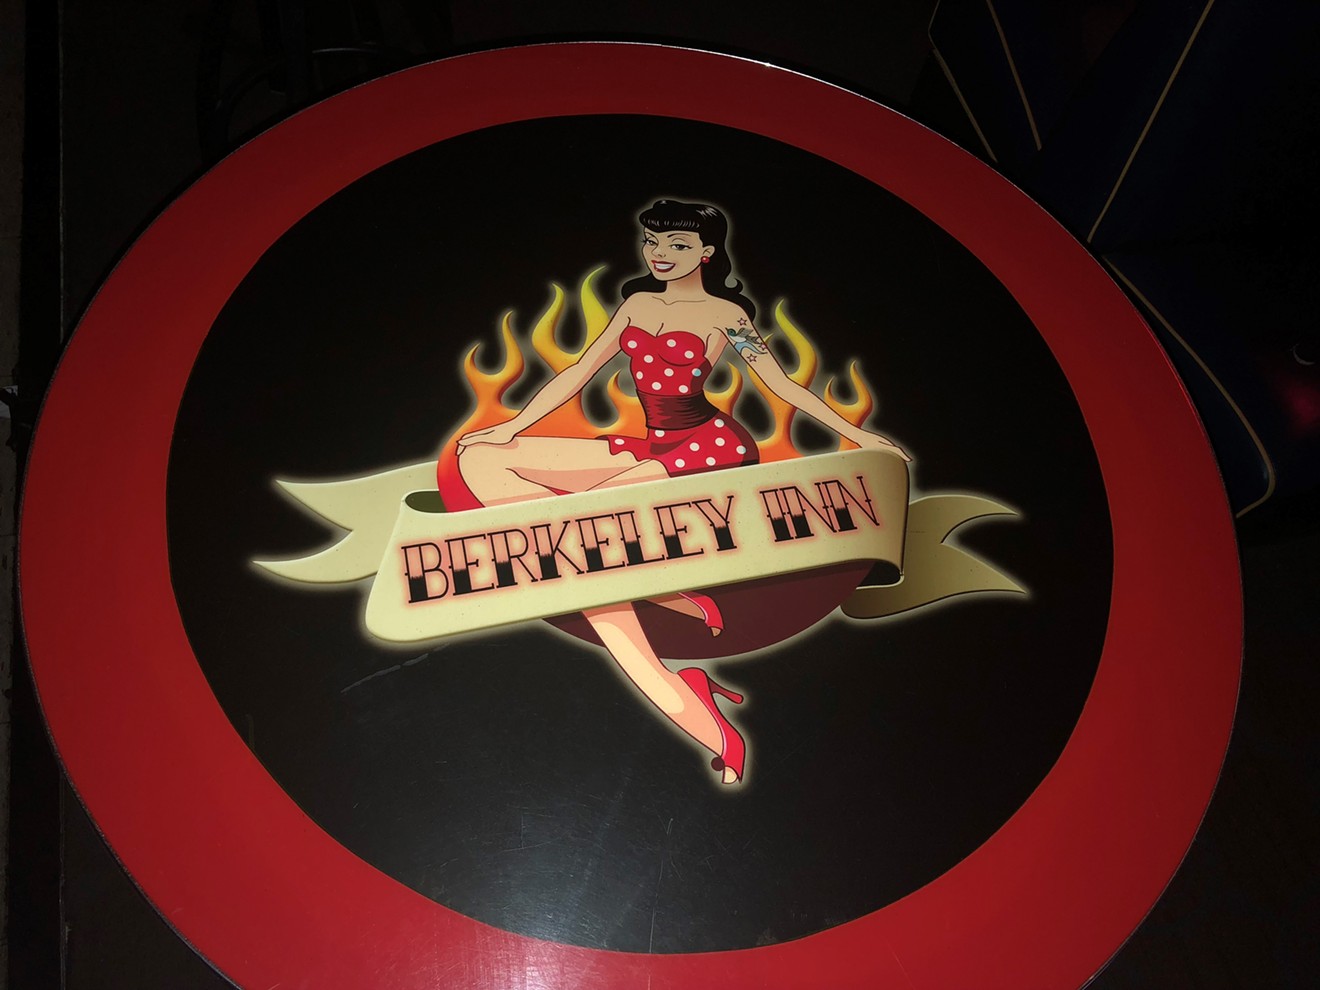 The Berkeley Inn logo can be found on tabletops throughout the bar, as well as on the sign outside.